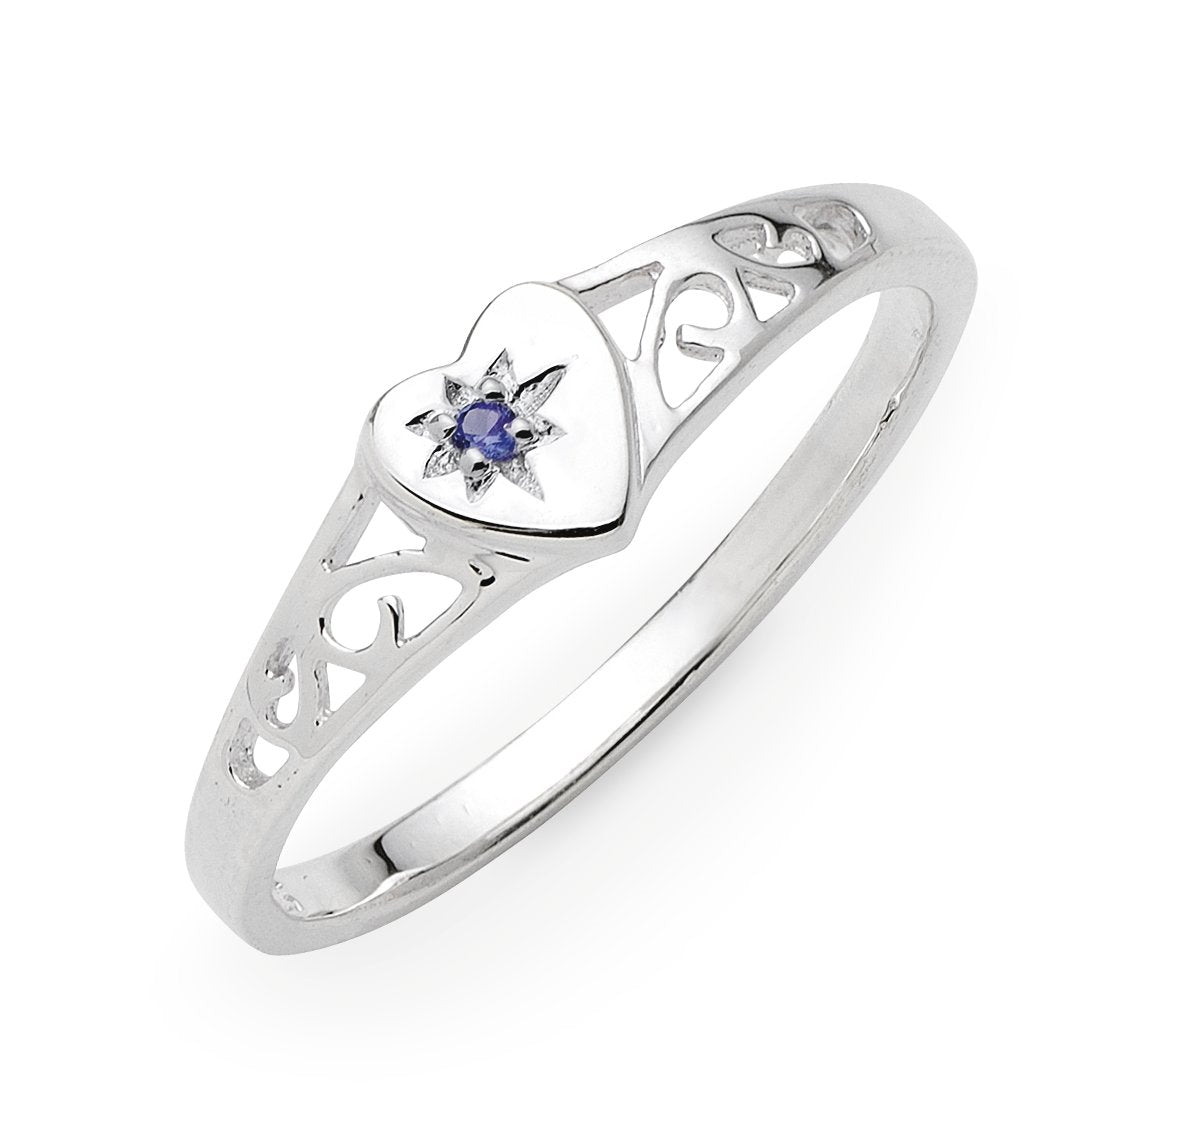 Sterling Silver Filgree Ring With Cubic Zirconium Sapphire Stone